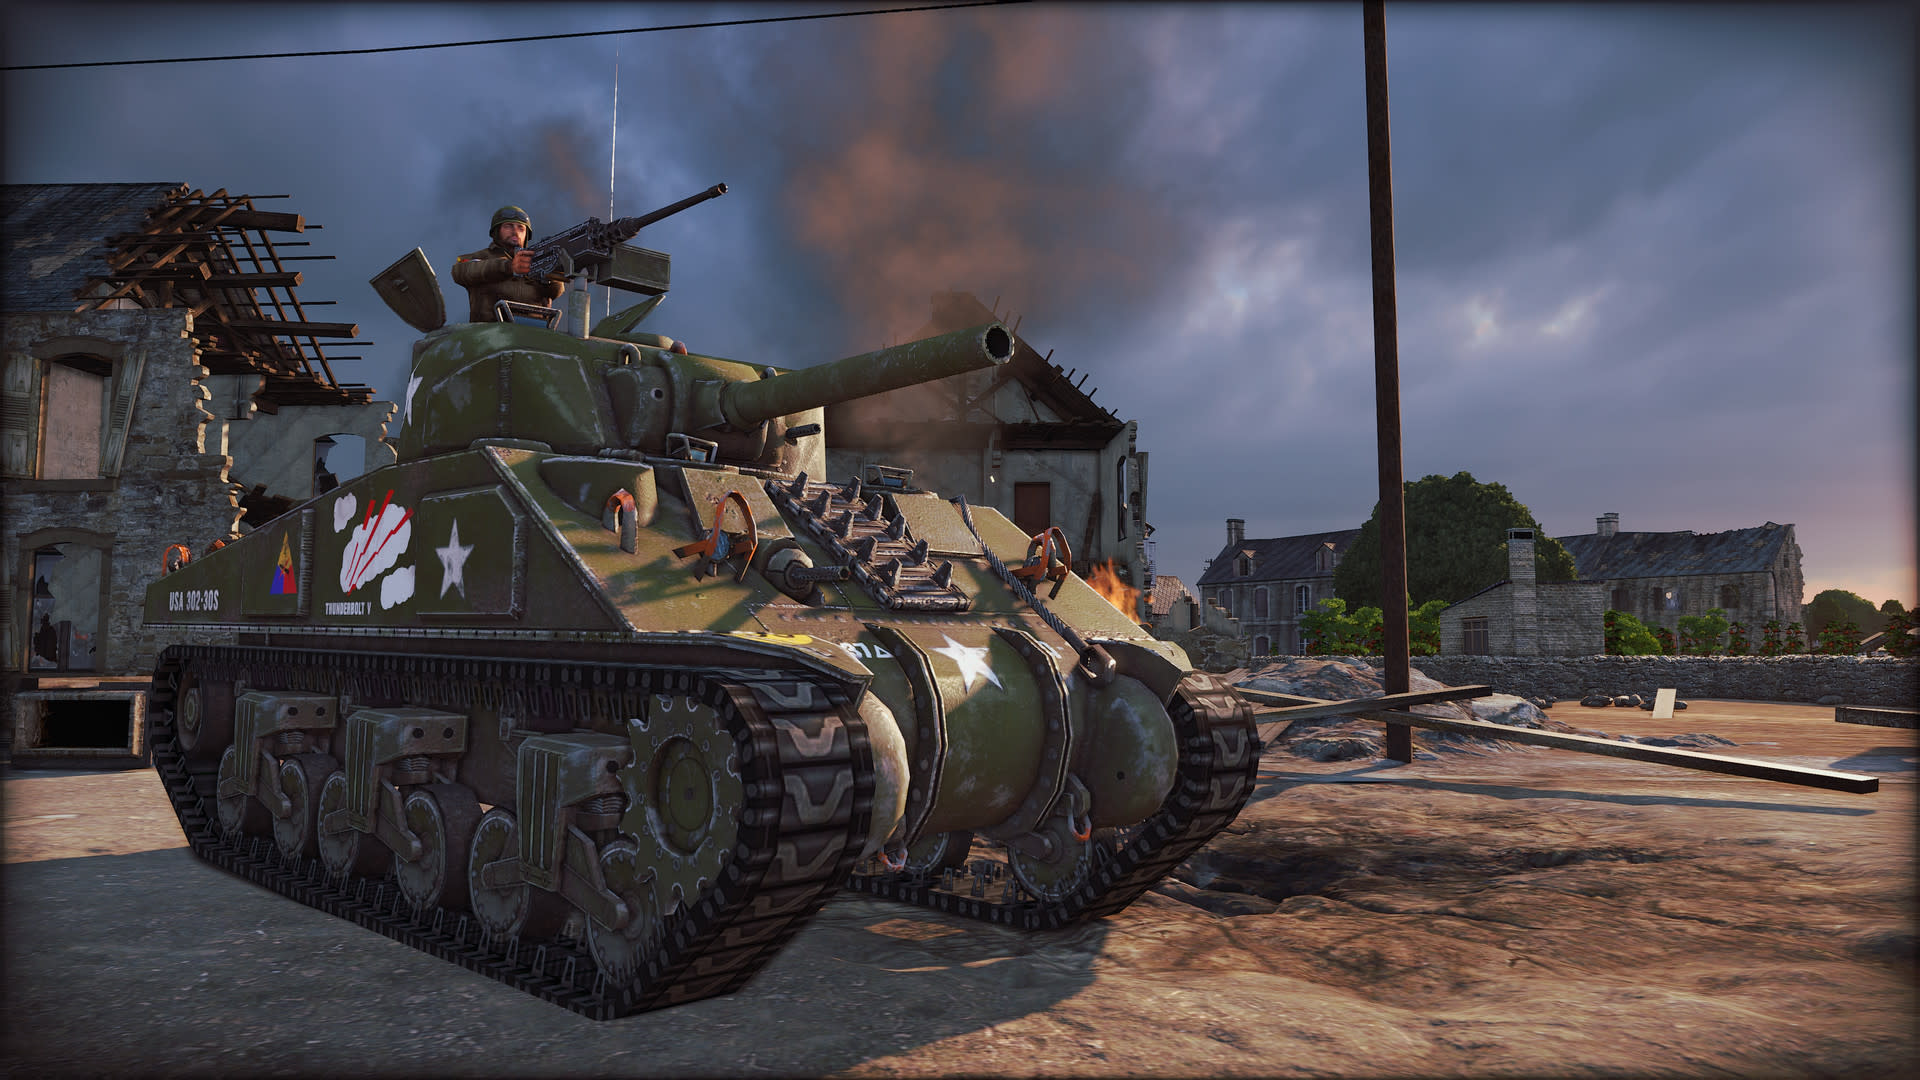 Steel Division: Normandy 44 - Second Wave (screenshot 5)